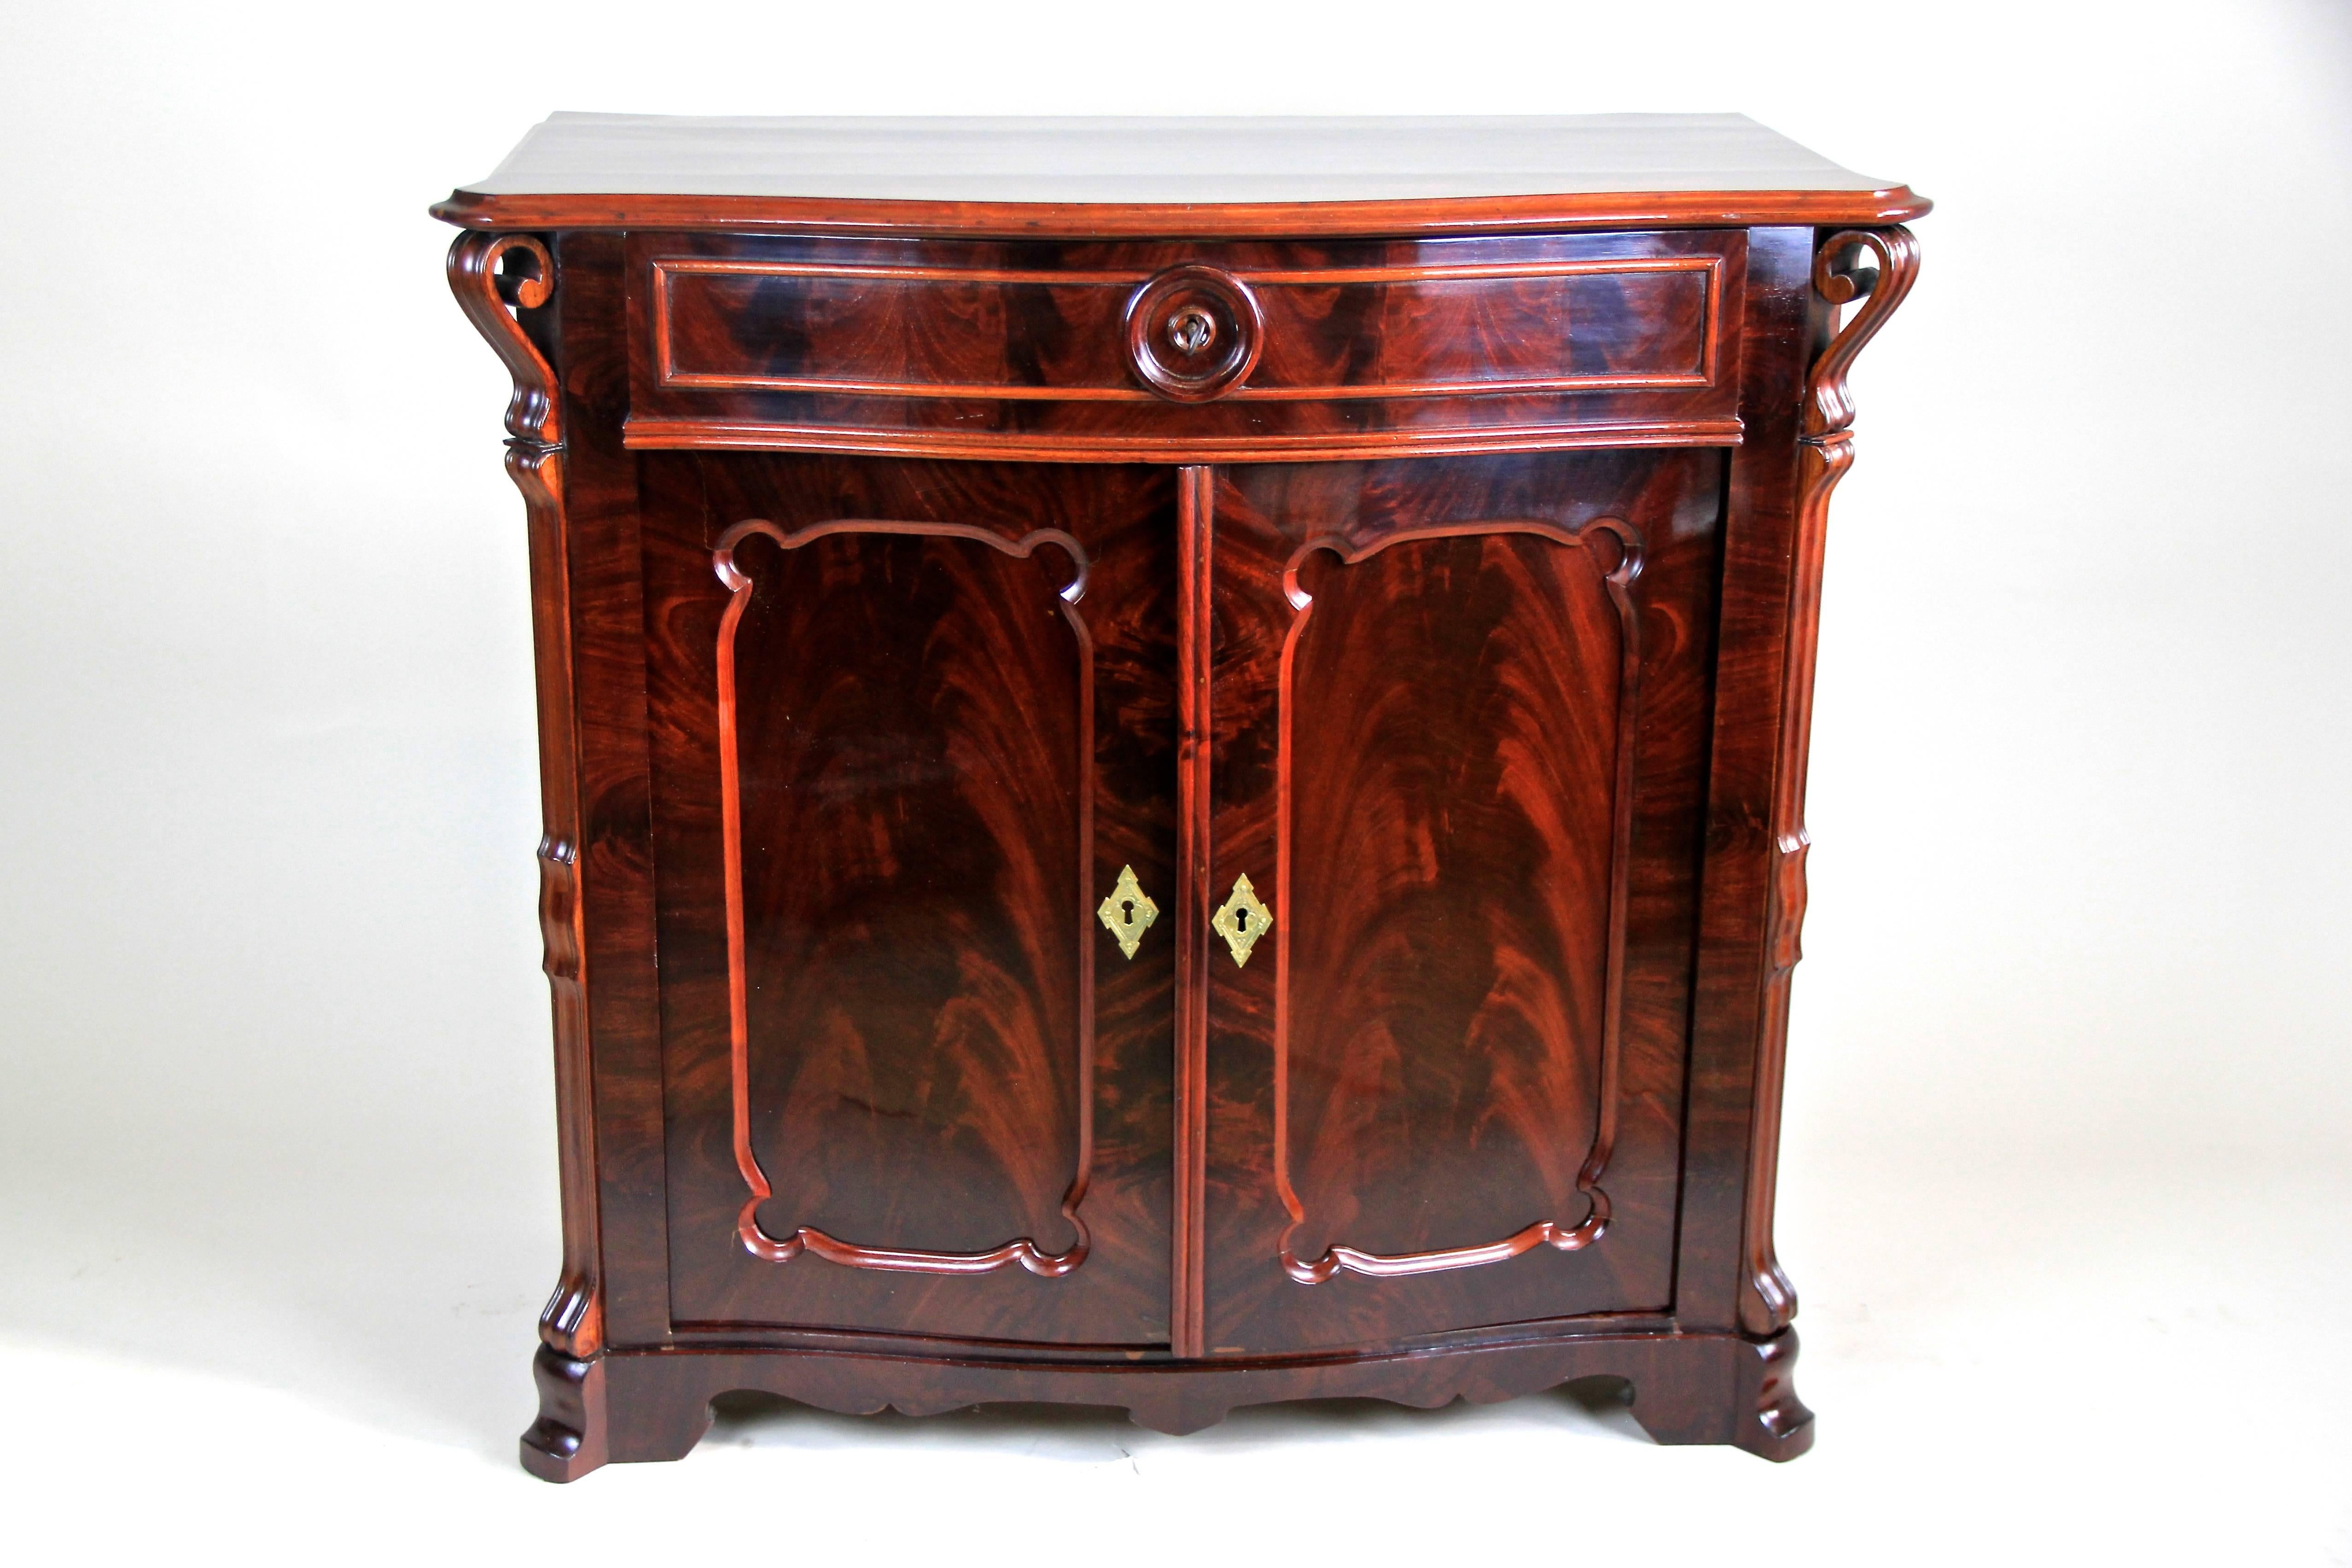 Brand new in our collection we offer you this outstanding Louis Philippe Trumeau commode made out of finest mahogany veneer. This compact Austrian Trumeau from the Louis Phillippe era around 1865 shows amazing hand-carved applications and an amazing